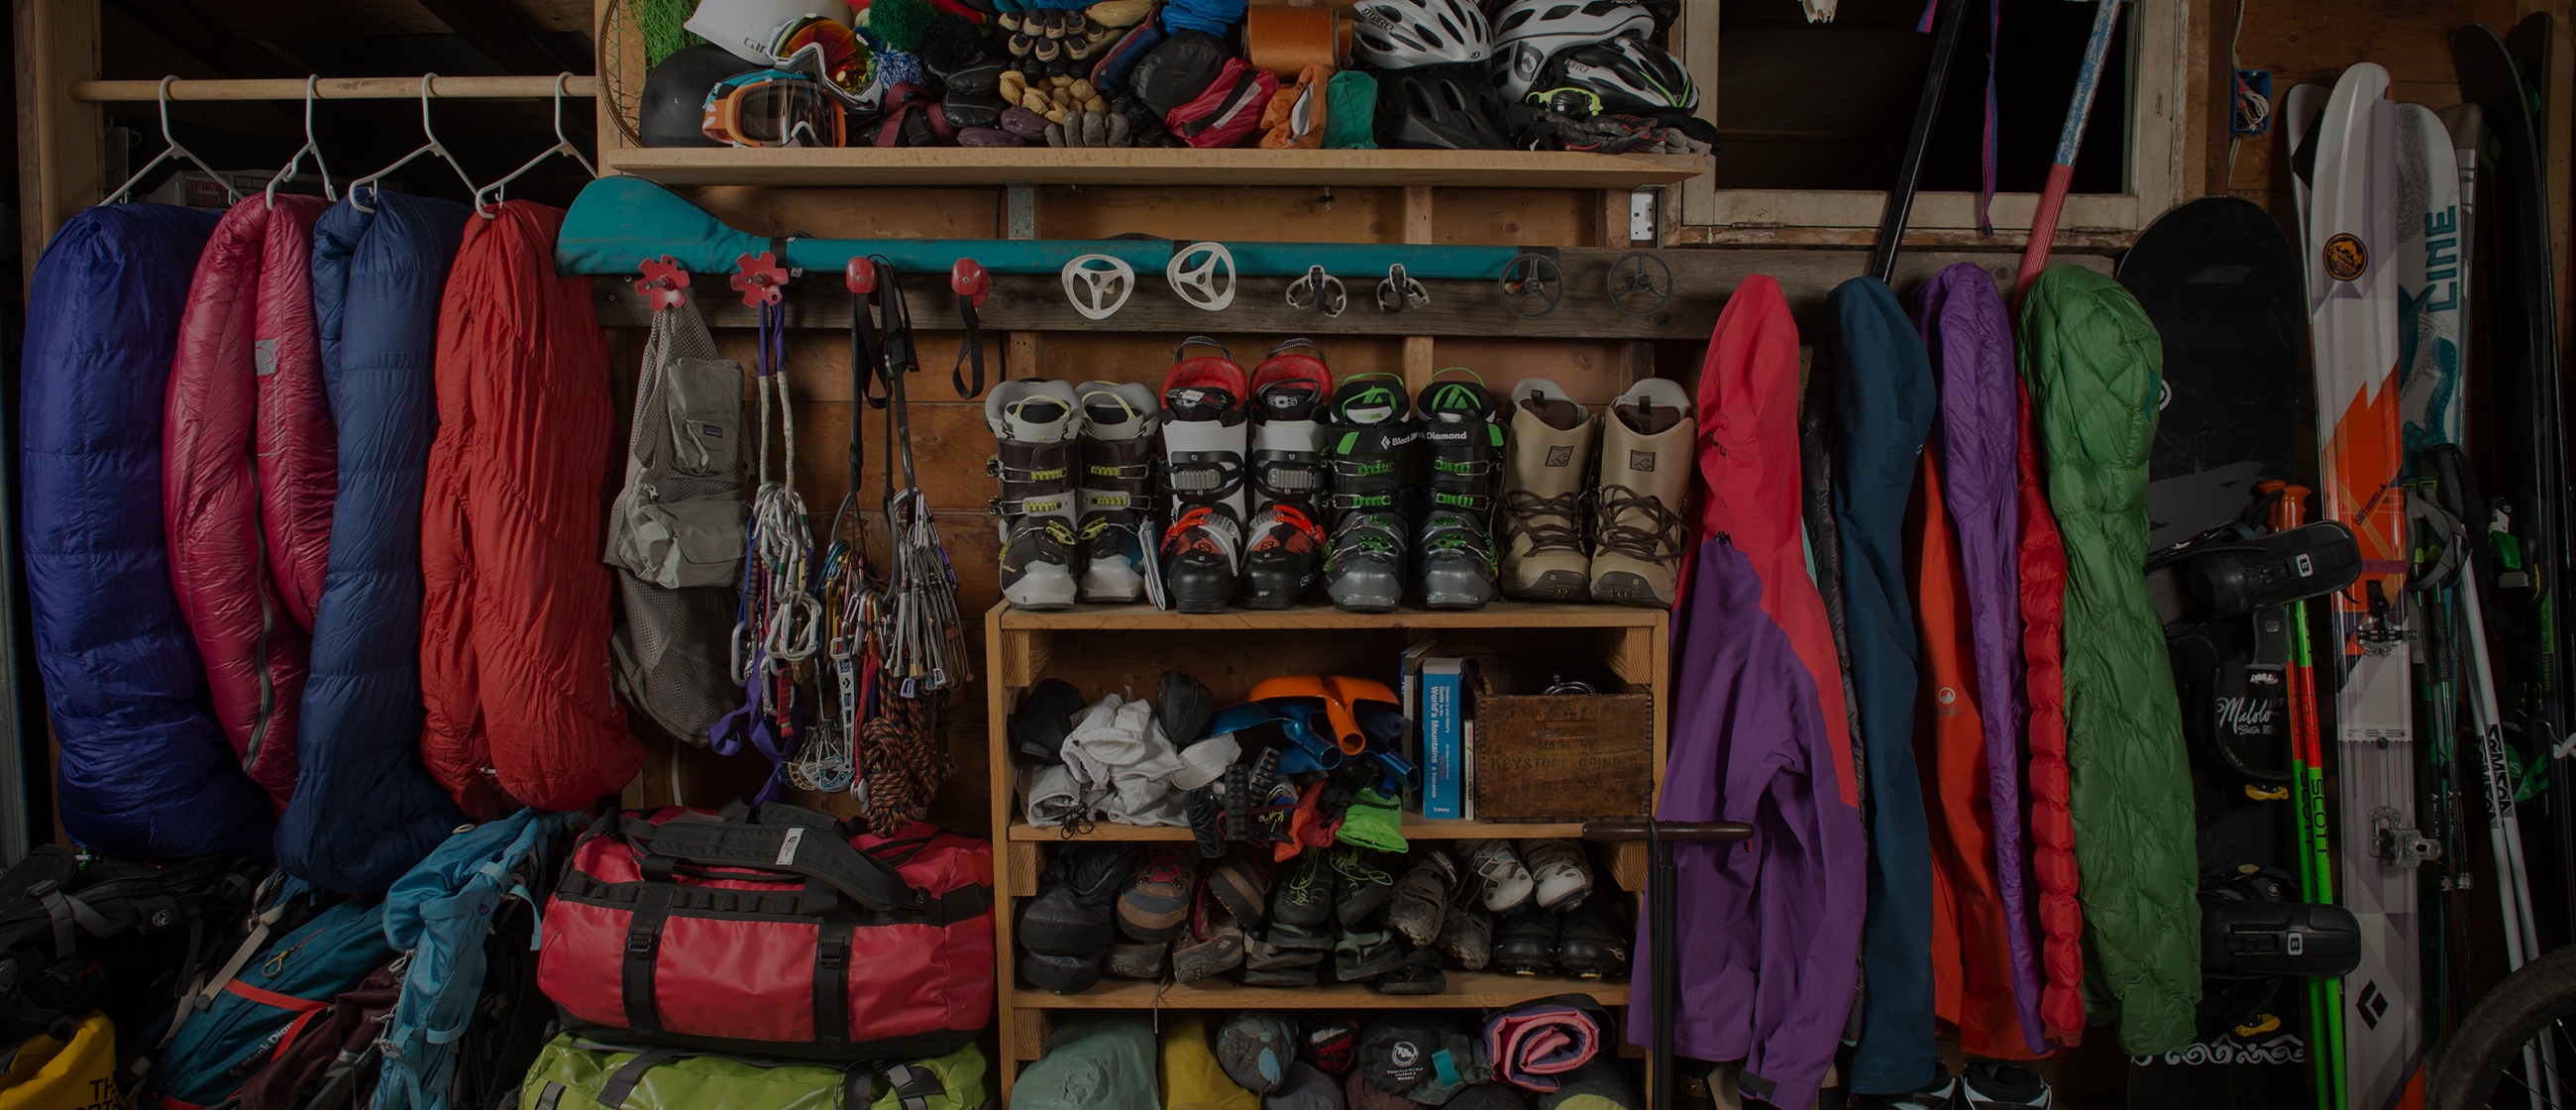 5 Super Practical Tips for Storing Your Camping Gear